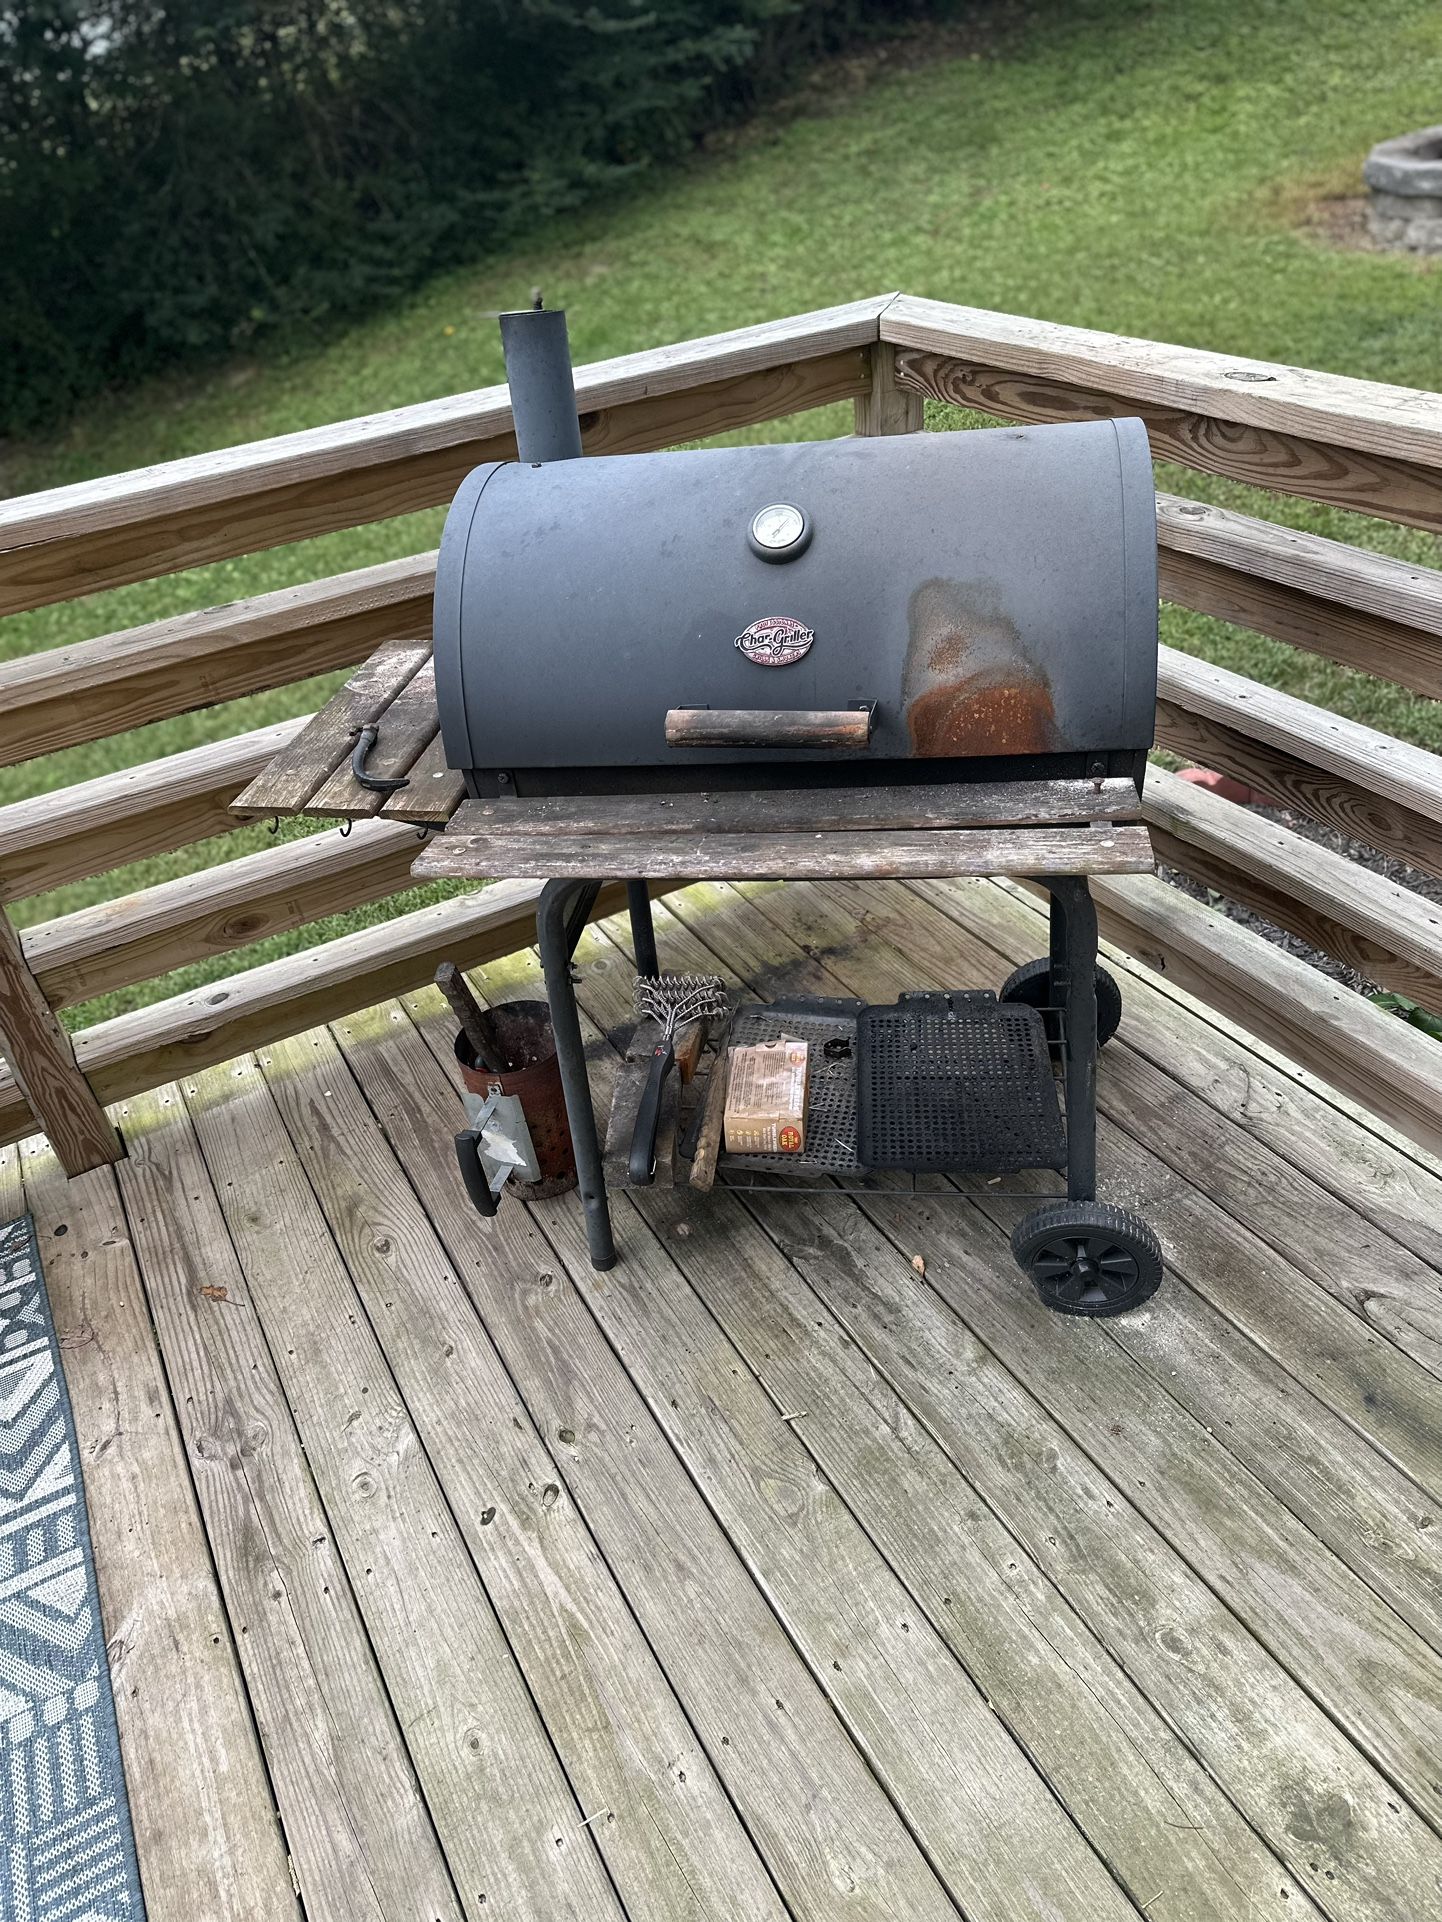 FREE TODAY 9/17!!! Budget-Friendly Charcoal Grill - Grill Masters, This One's for You!